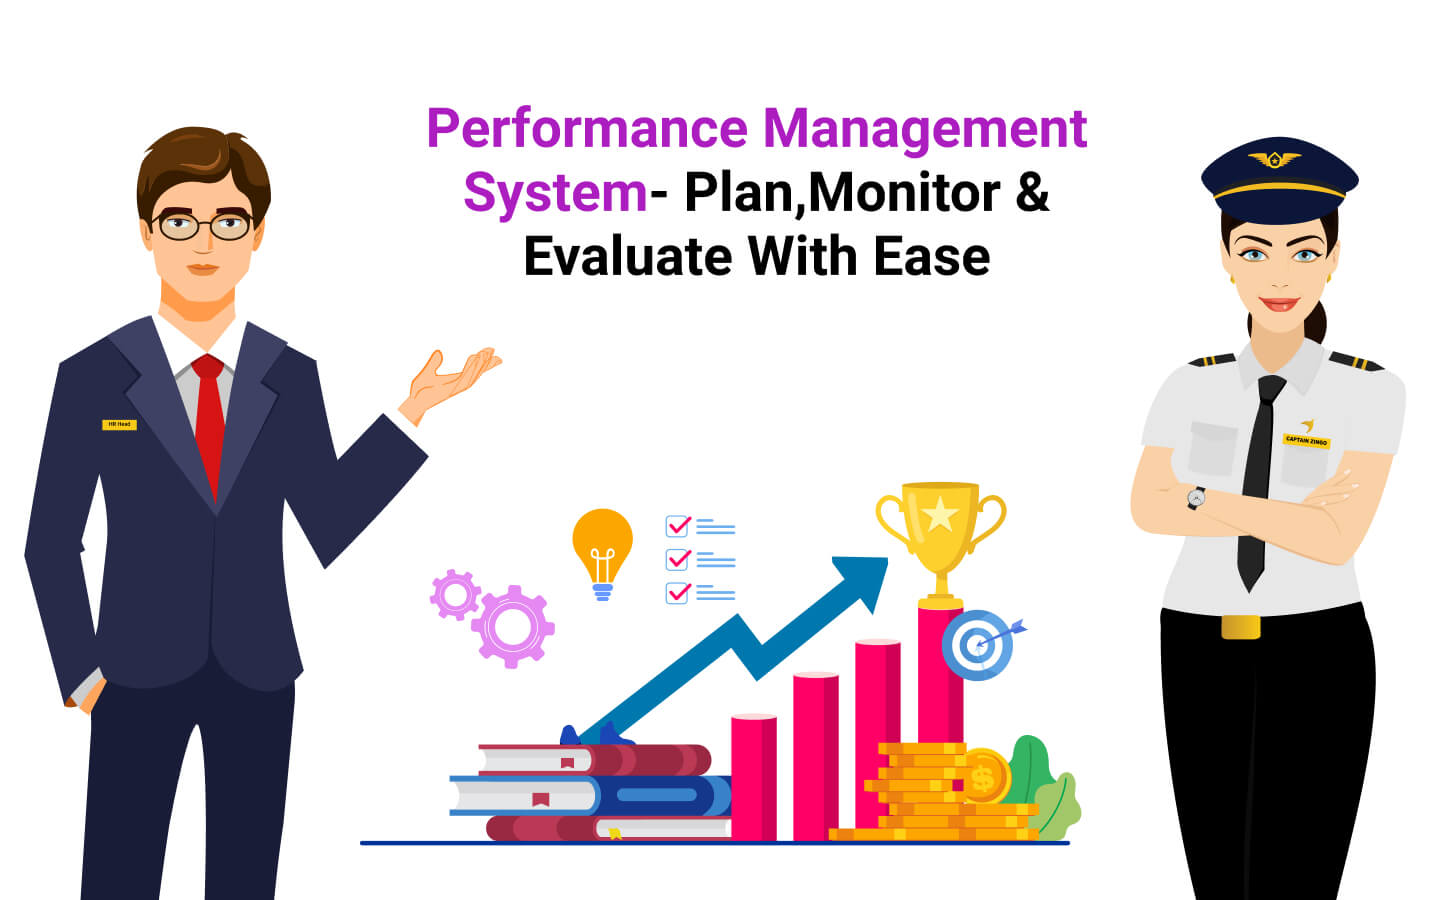 Performance Management System- Plan,Monitor & Evaluate With Ease